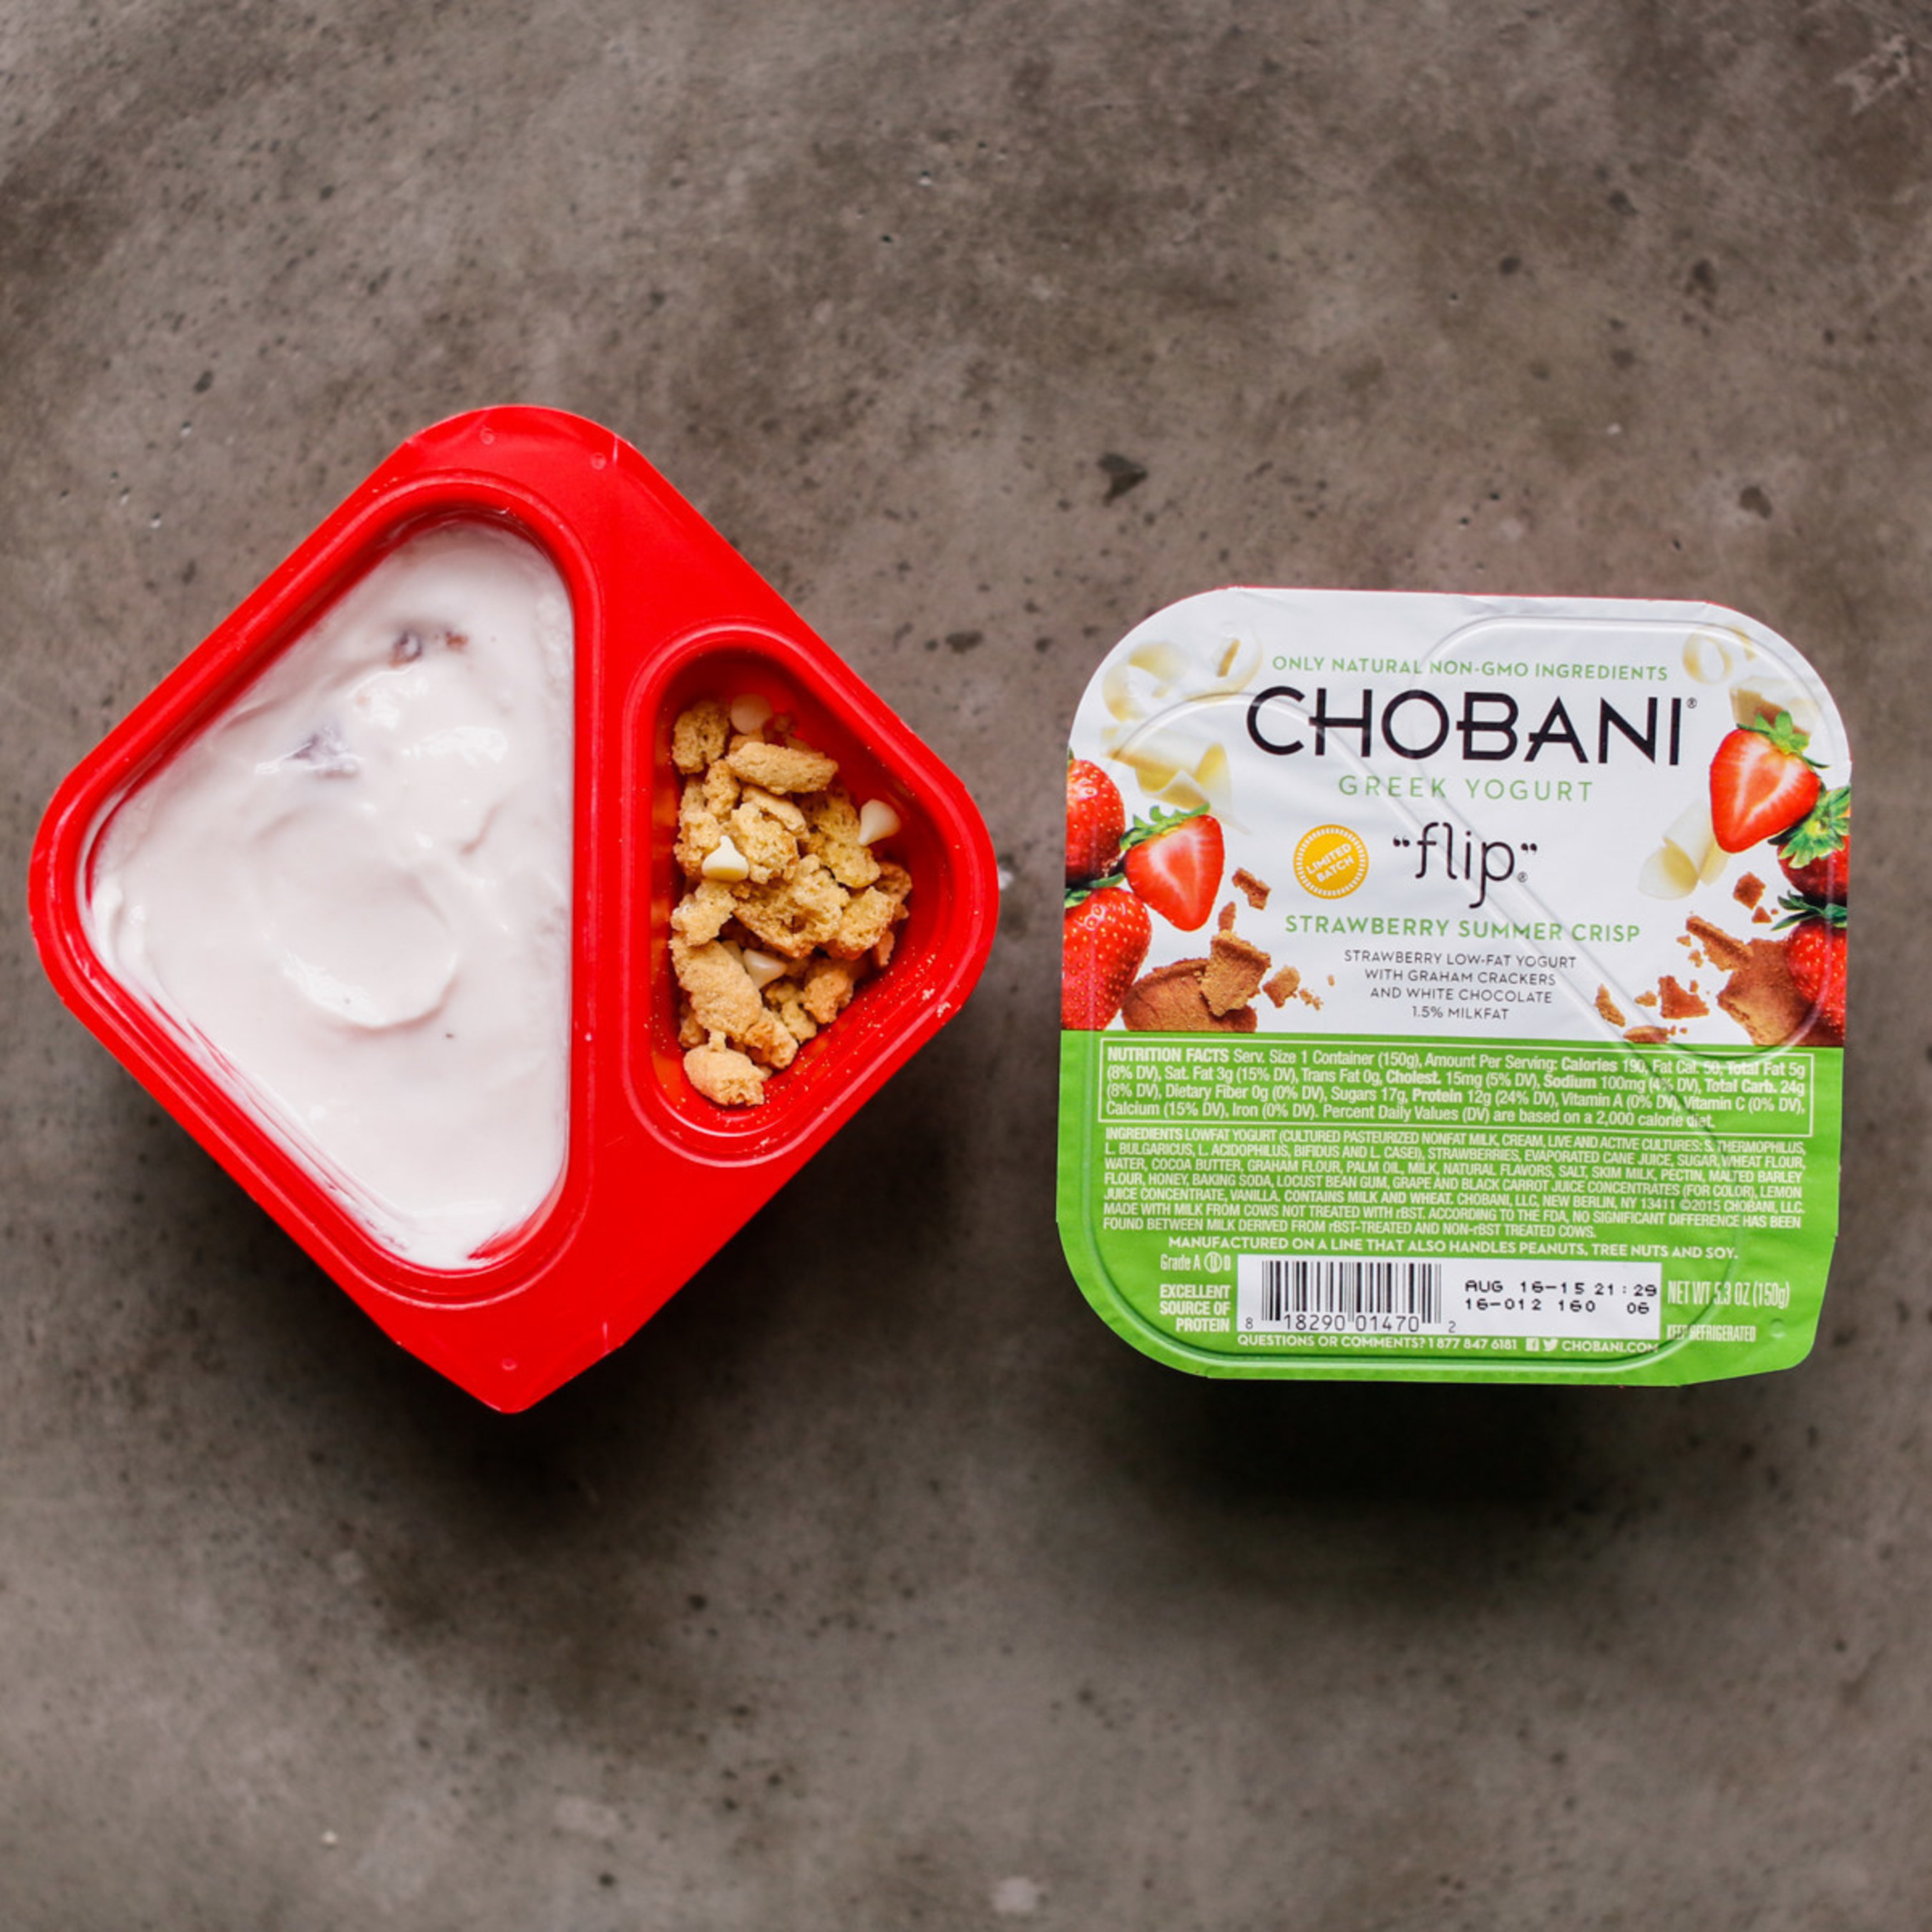 Chobani Limited Batch Strawberry Summer Crisp is the perfect taste of the season with creamy Greek Yogurt and real, delicious, natural ingredients to mix in!